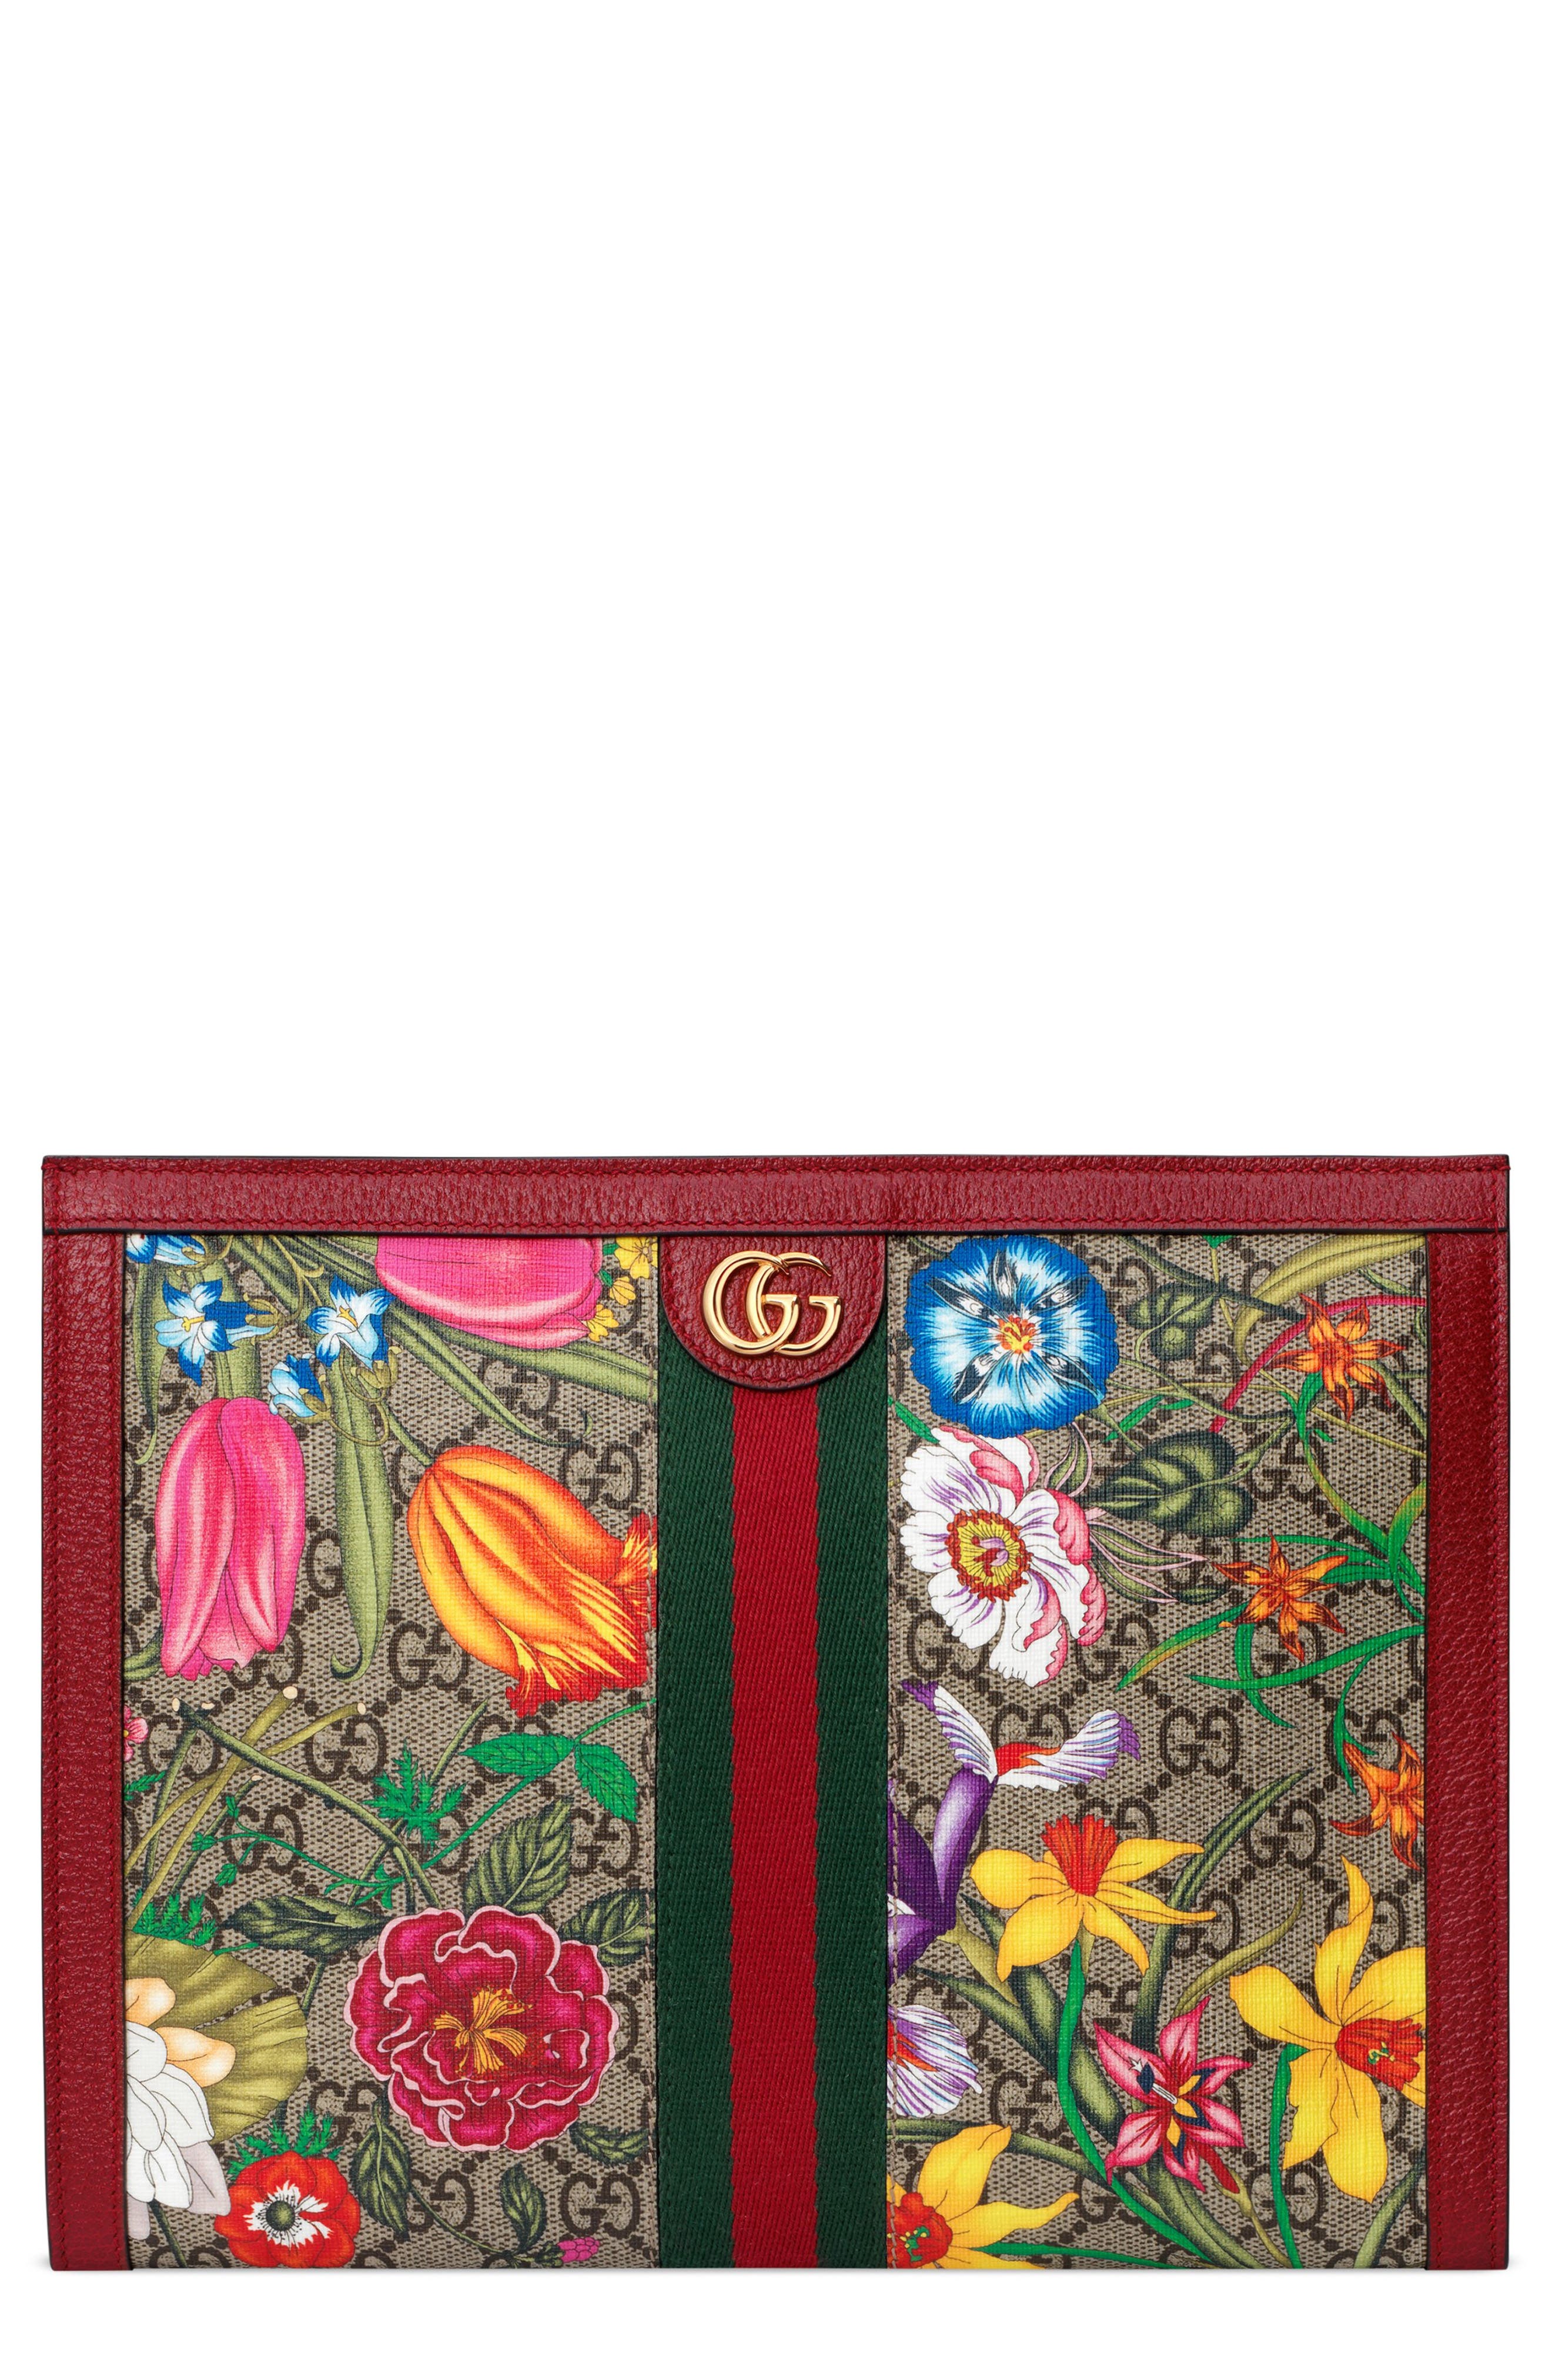 gucci ophidia canvas